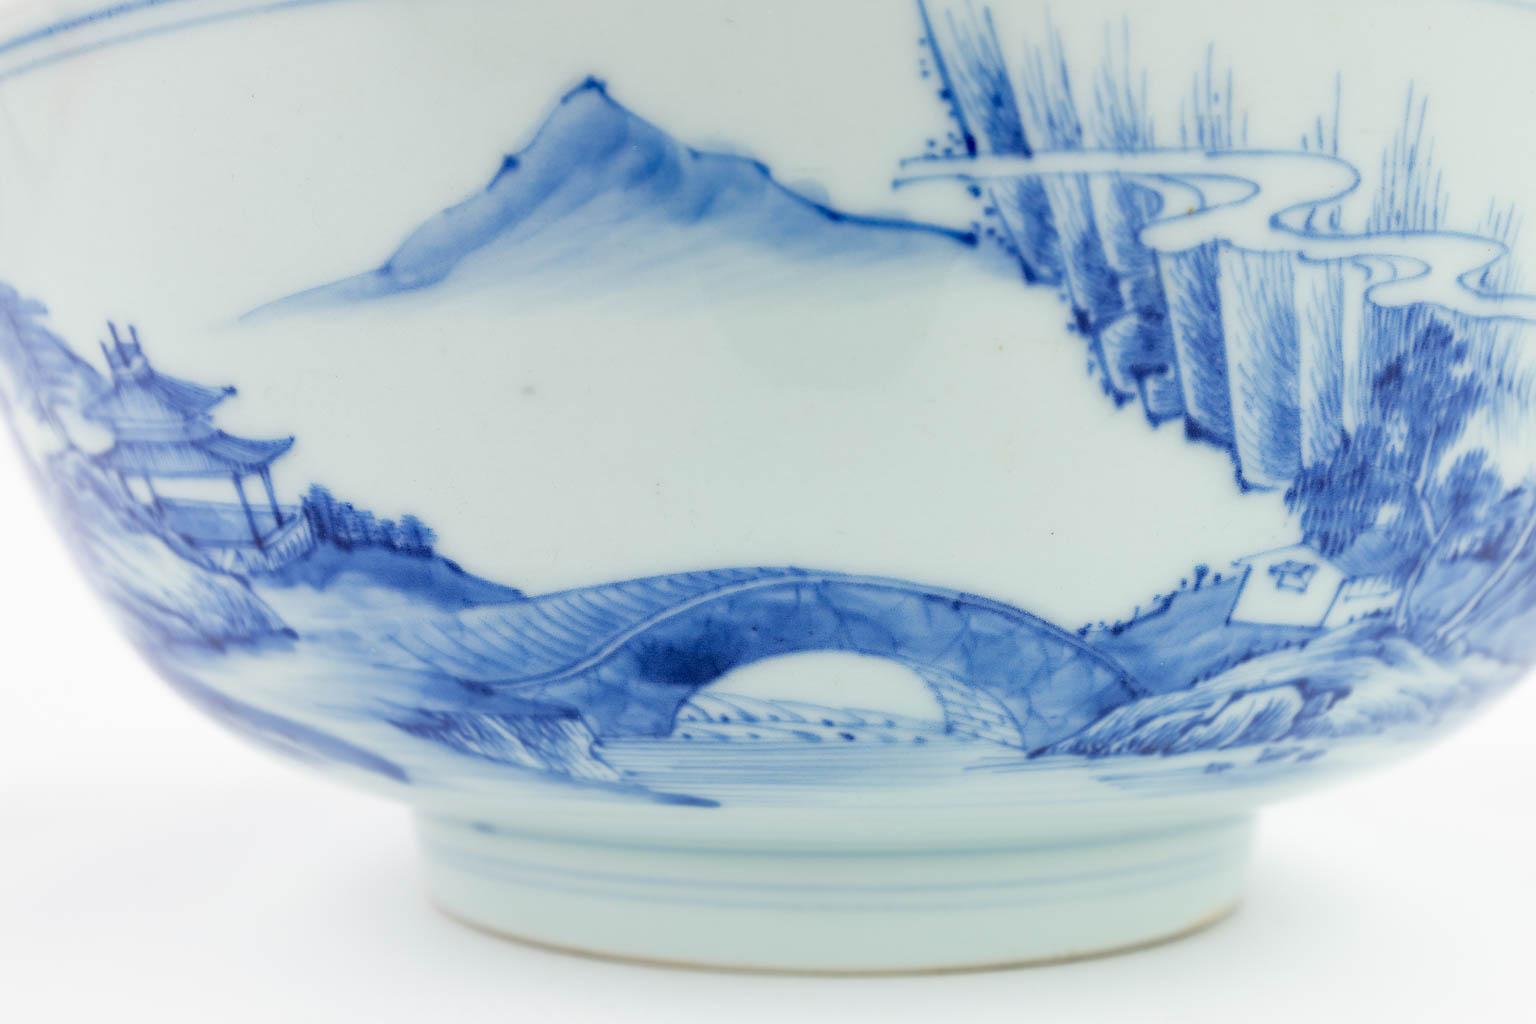 A pair of Chinese bowls made of blue-white porcelain. 18th/19th century. 